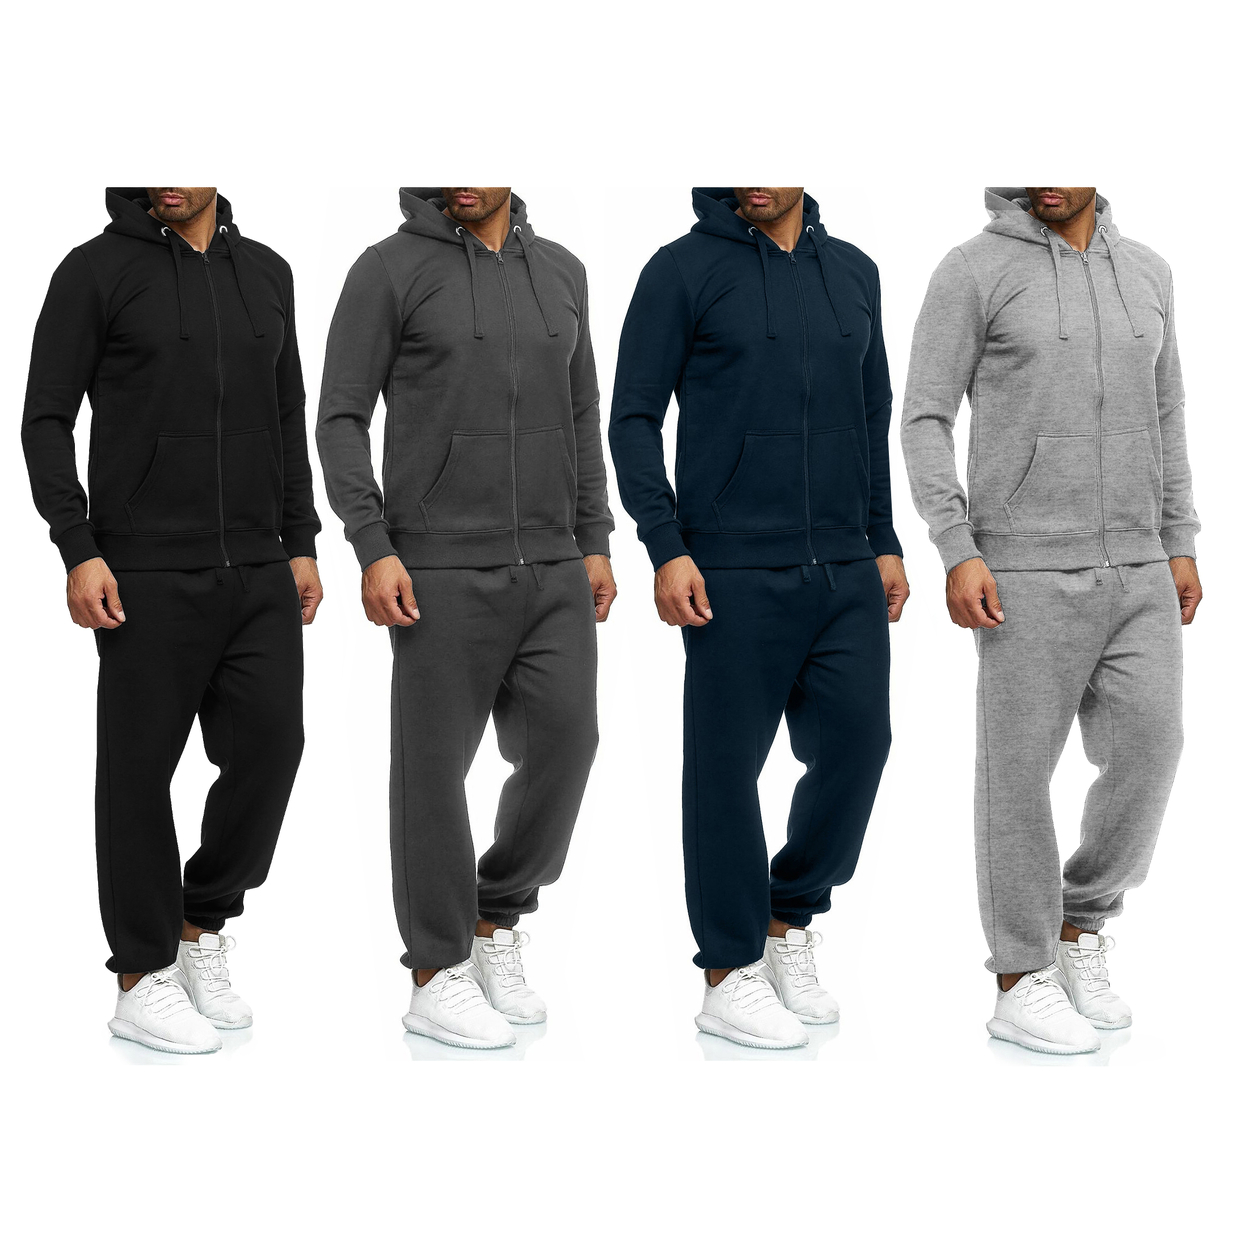 Multi-Pack: Men's Casual Big & Tall Athletic Active Winter Warm Fleece Lined Full Zip Tracksuit Jogger Set - Navy, 2-pack, X-large